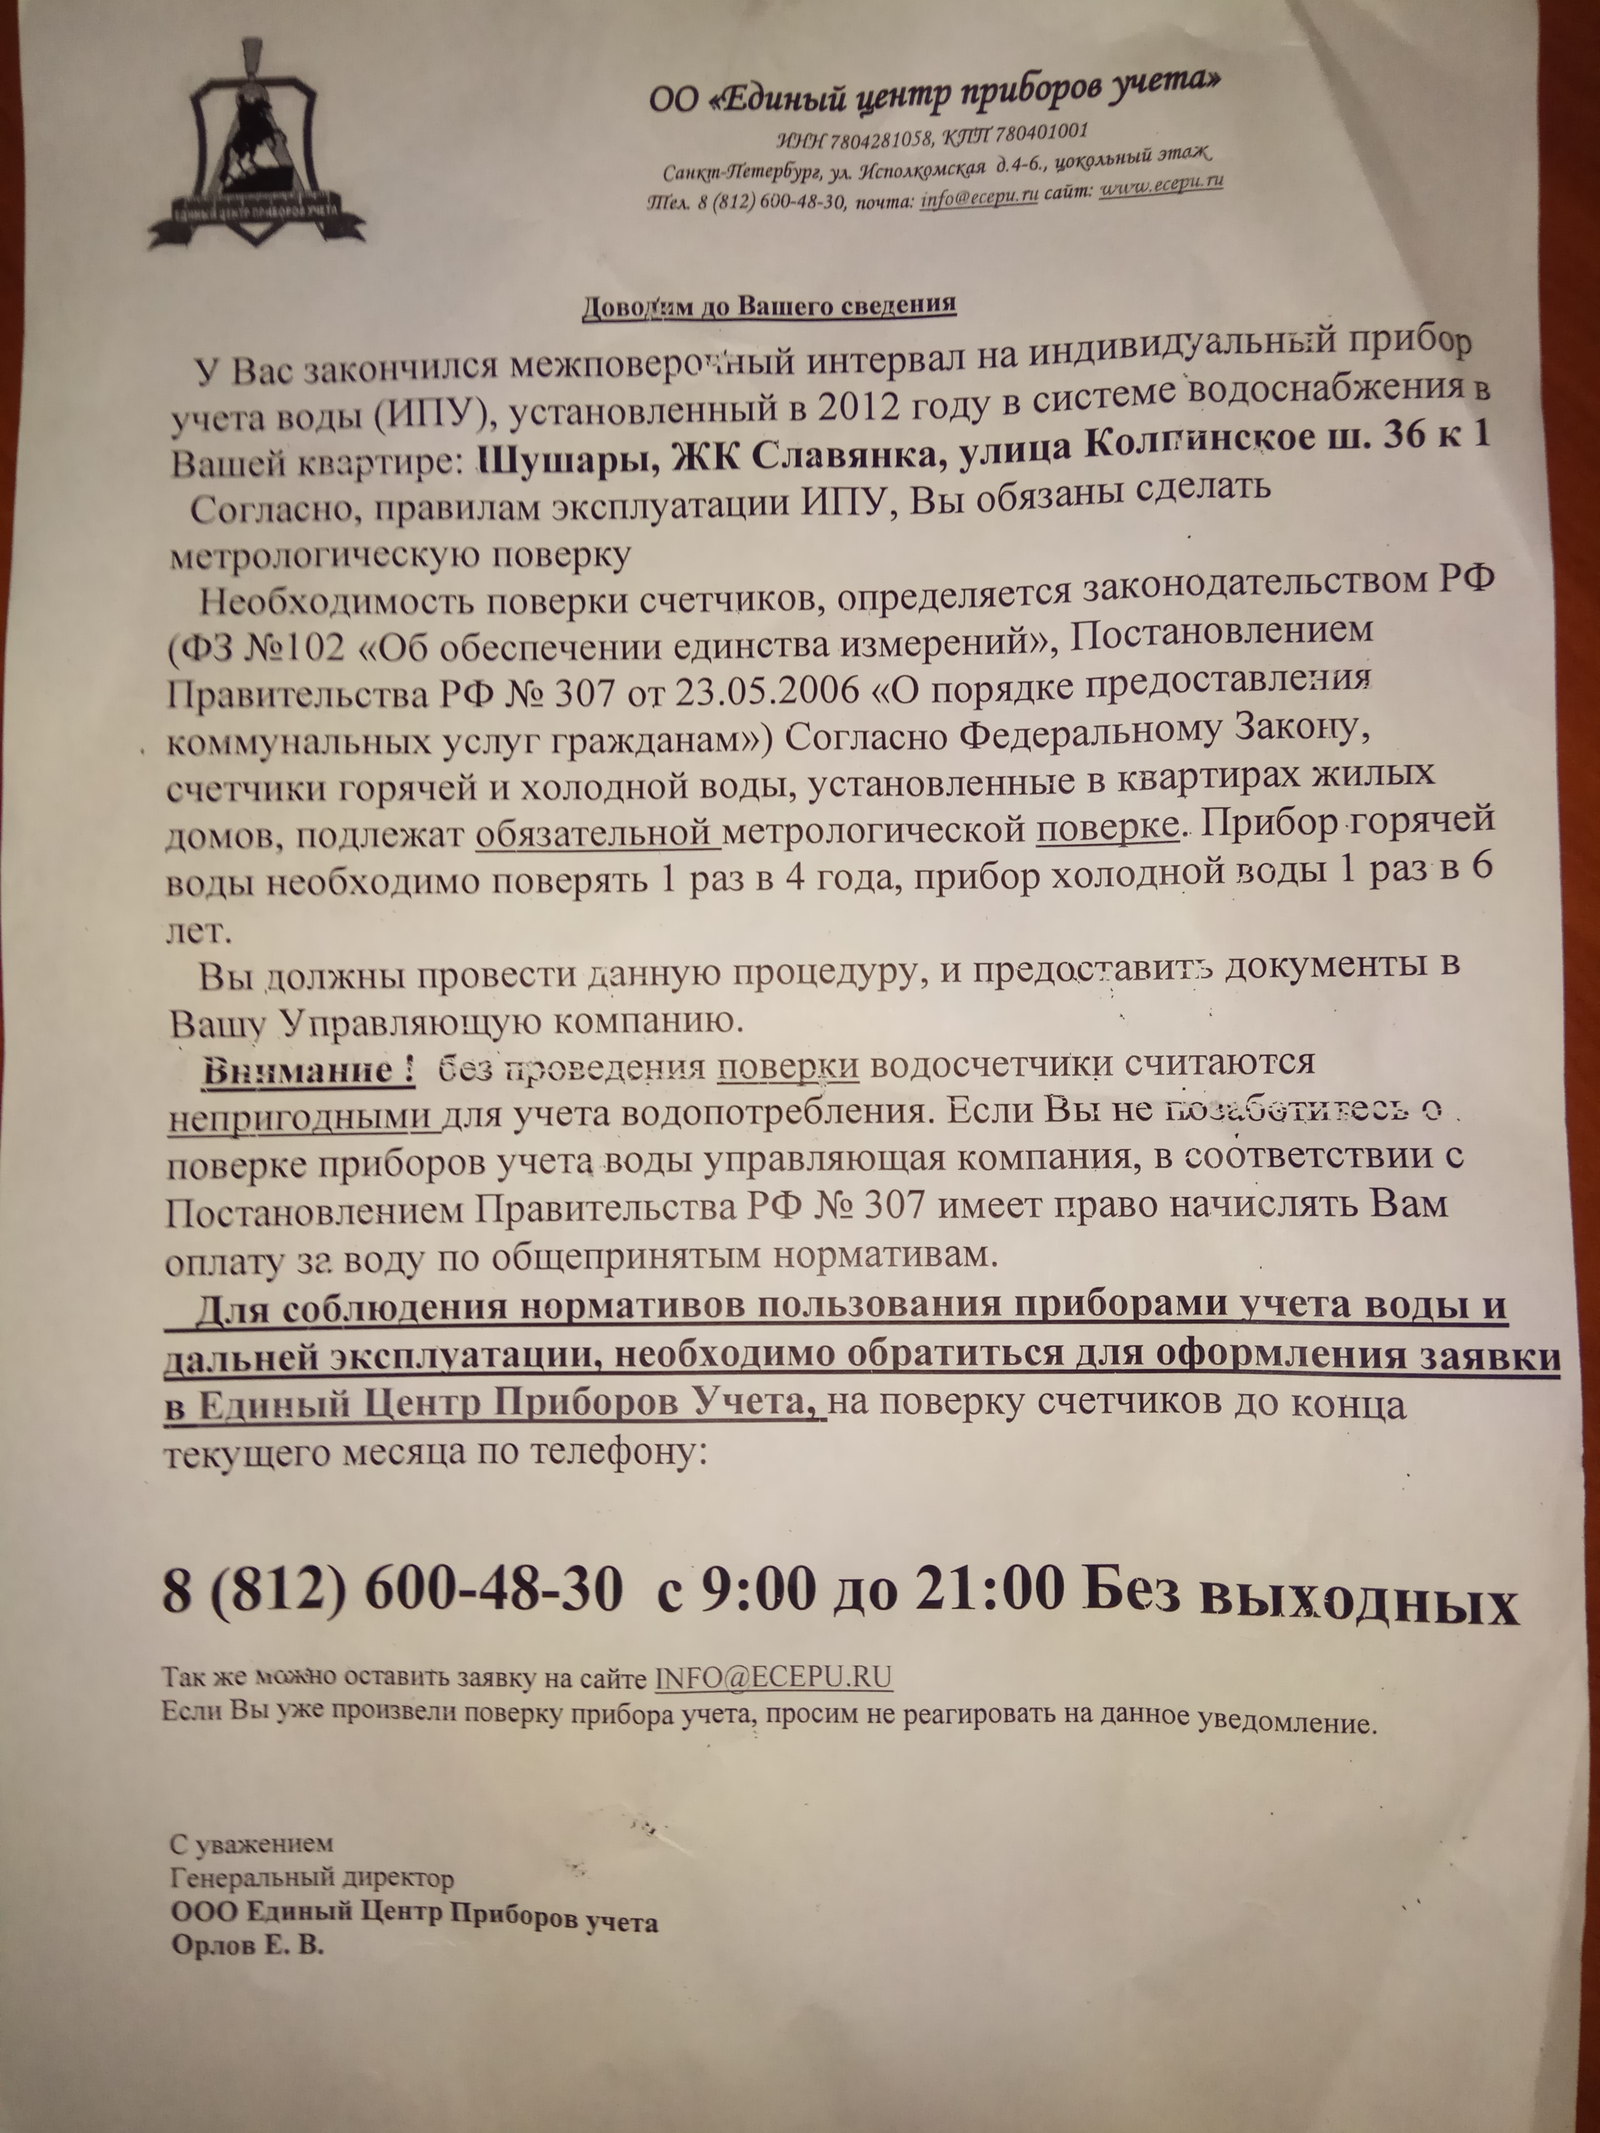 Attention, scammers! - My, Saint Petersburg, Shushary, , Fraud, Bank, They go to the apartments, , Housing and communal services, Residential complex